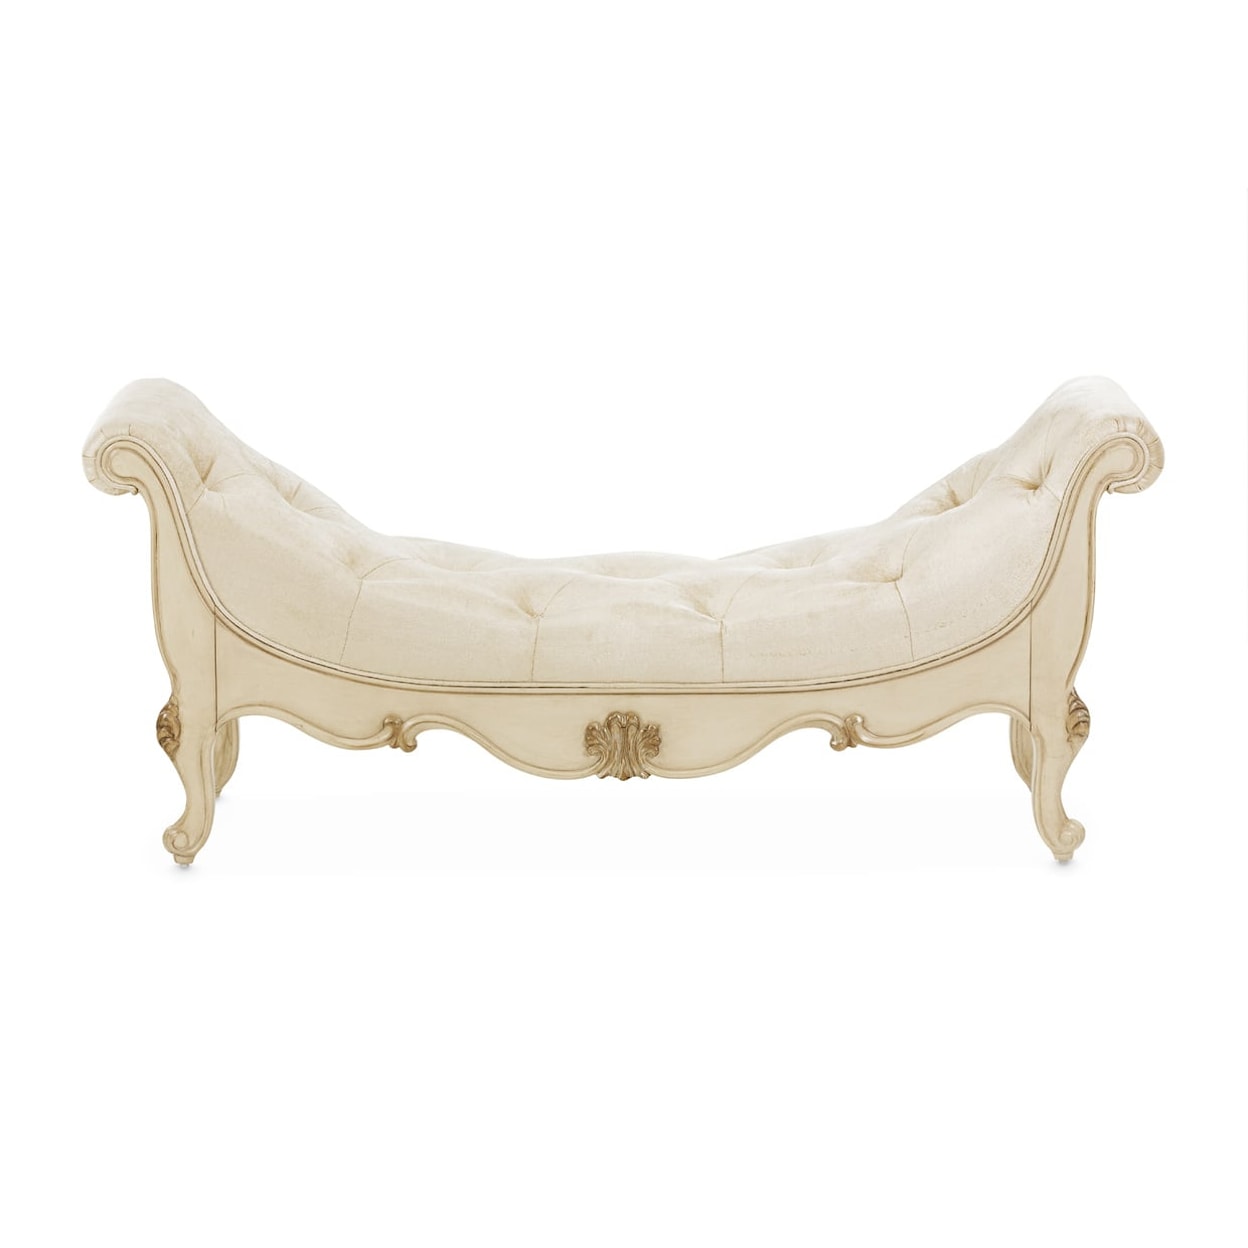 Michael Amini Platine de Royale Upholstered Bed Bench